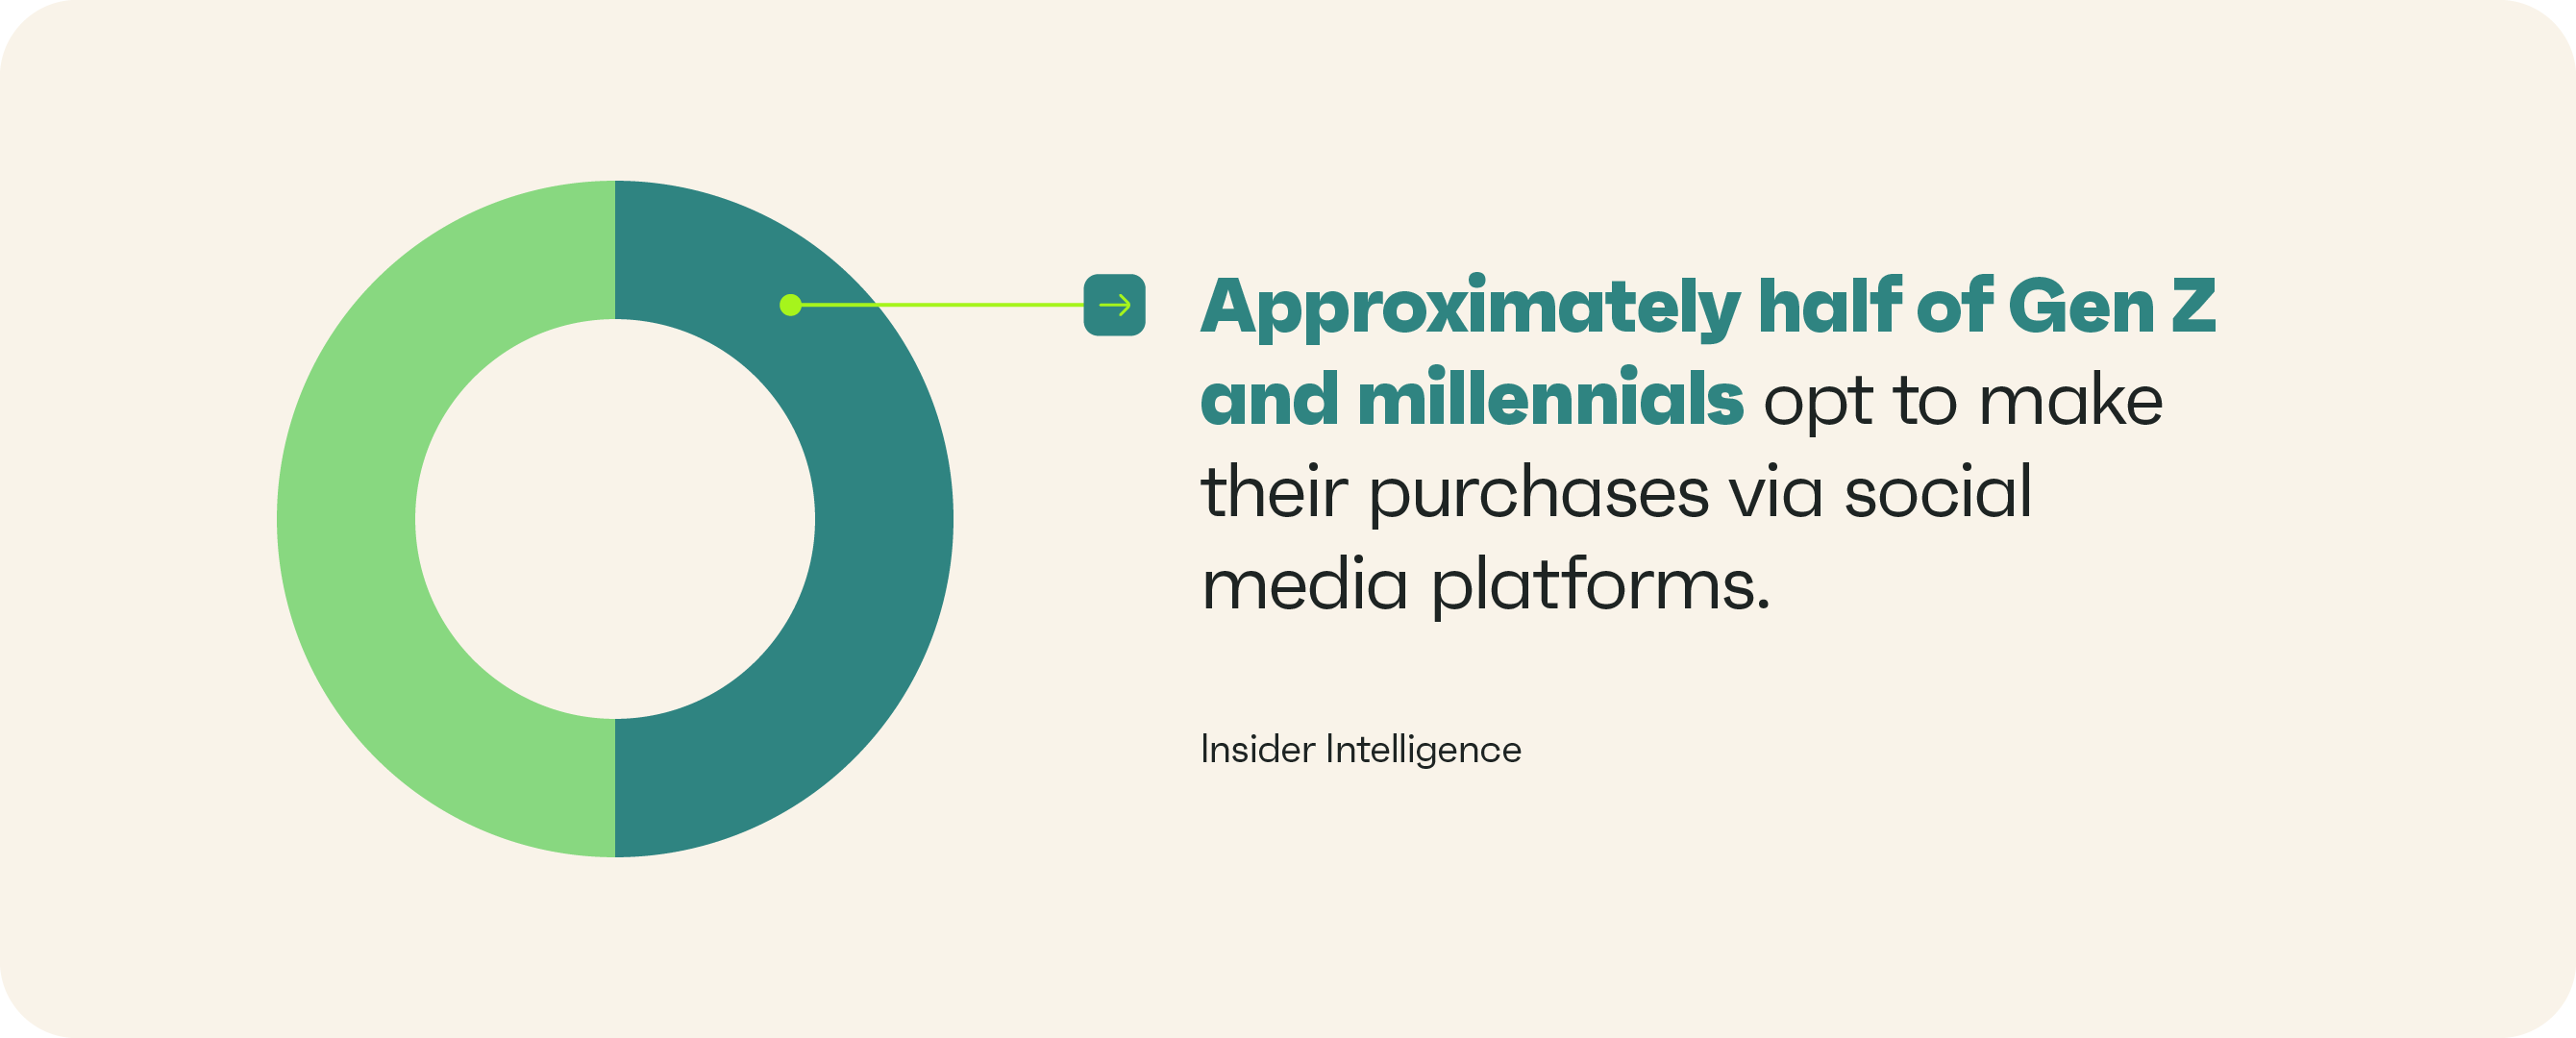 Approximately half of Gen Z and millennials opt to make their purchases via social media platforms